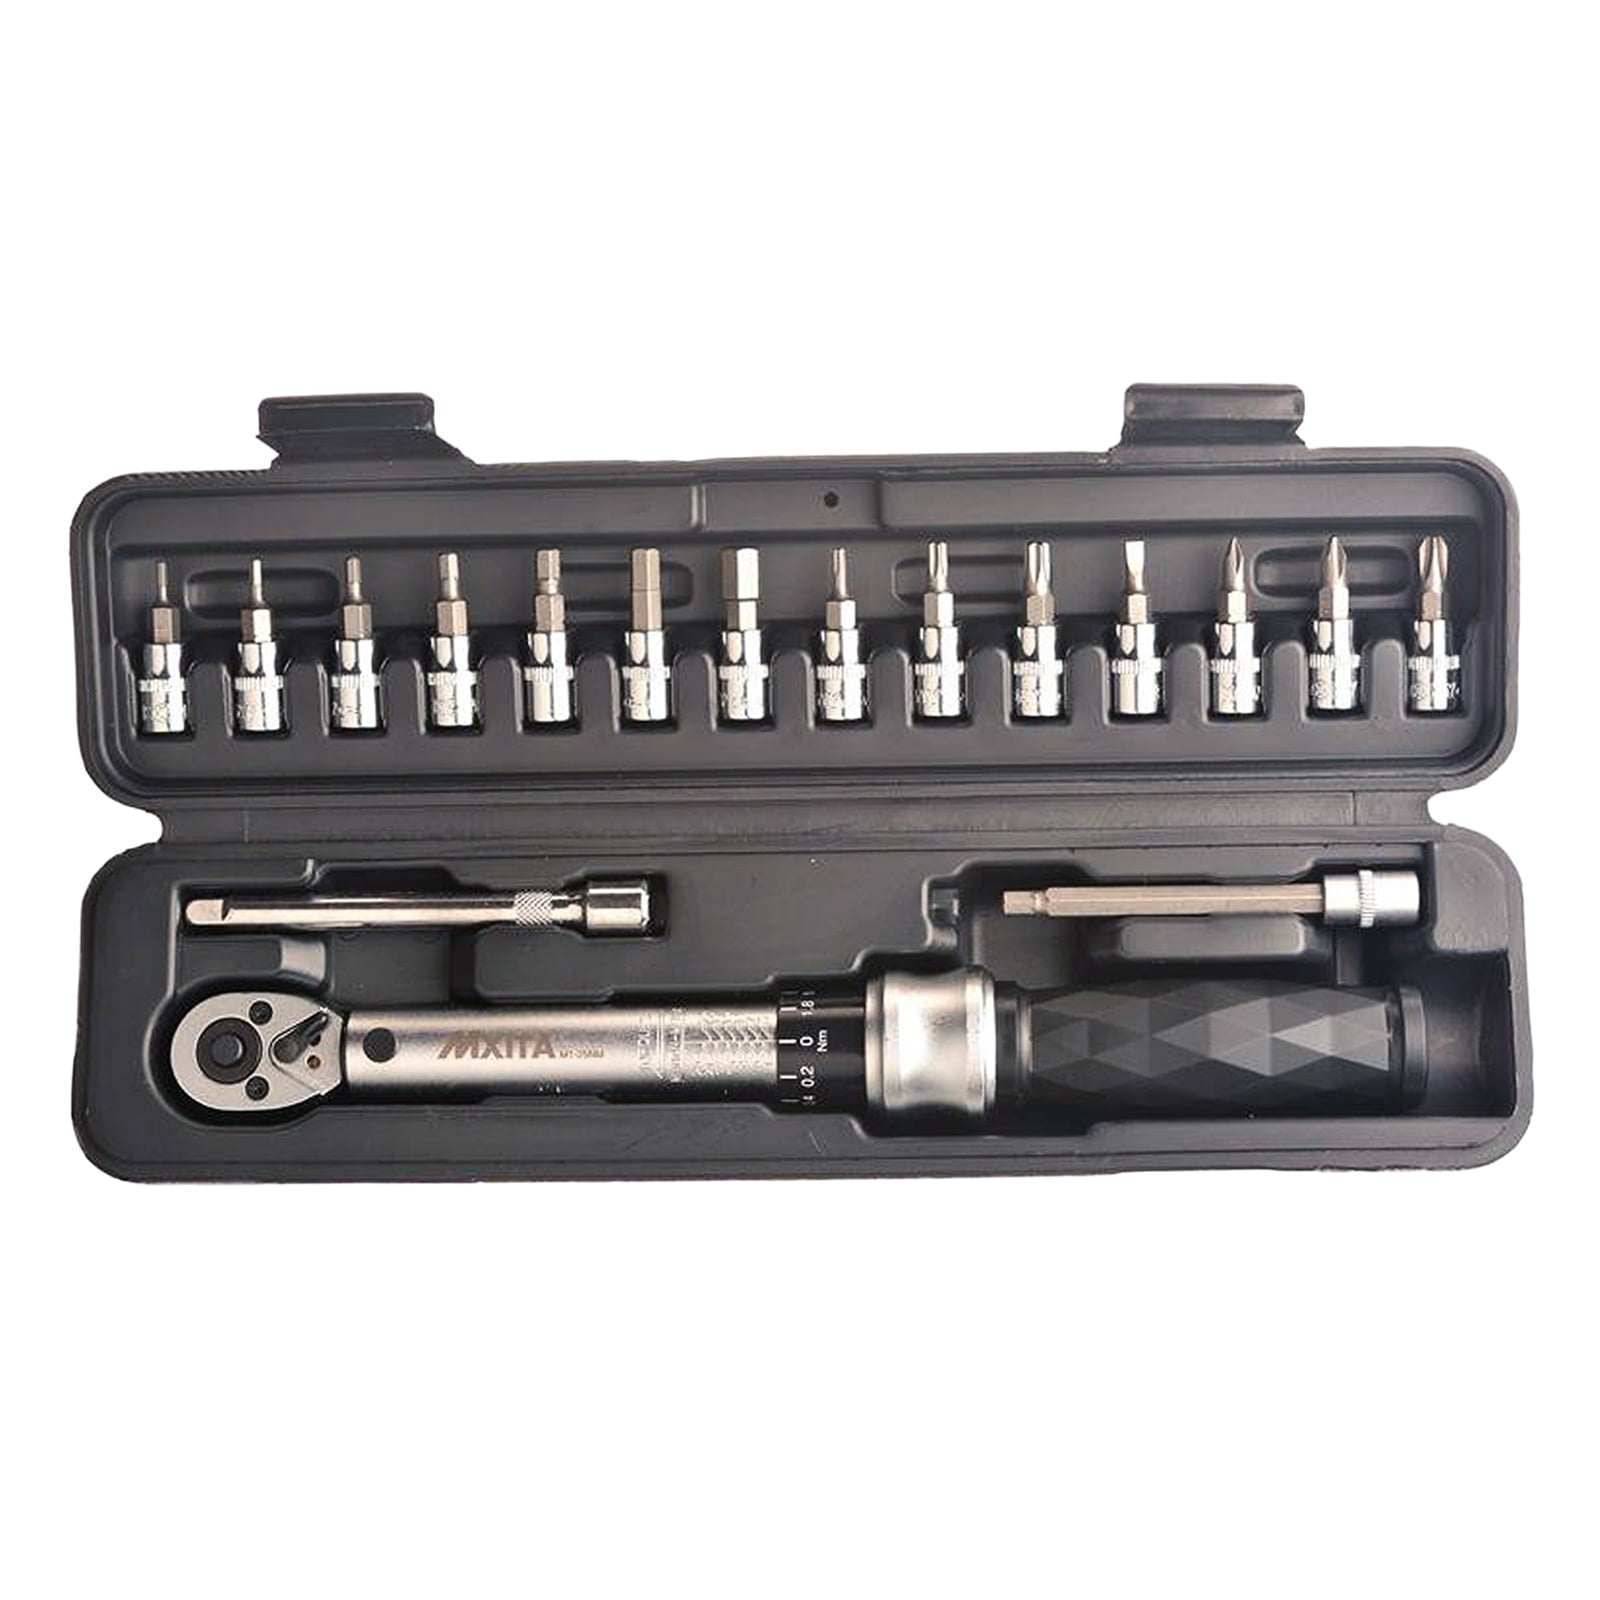 5pc Extensions 1/4" Drive Click Torque Wrench 5-25 Nm With Metric Sockets 